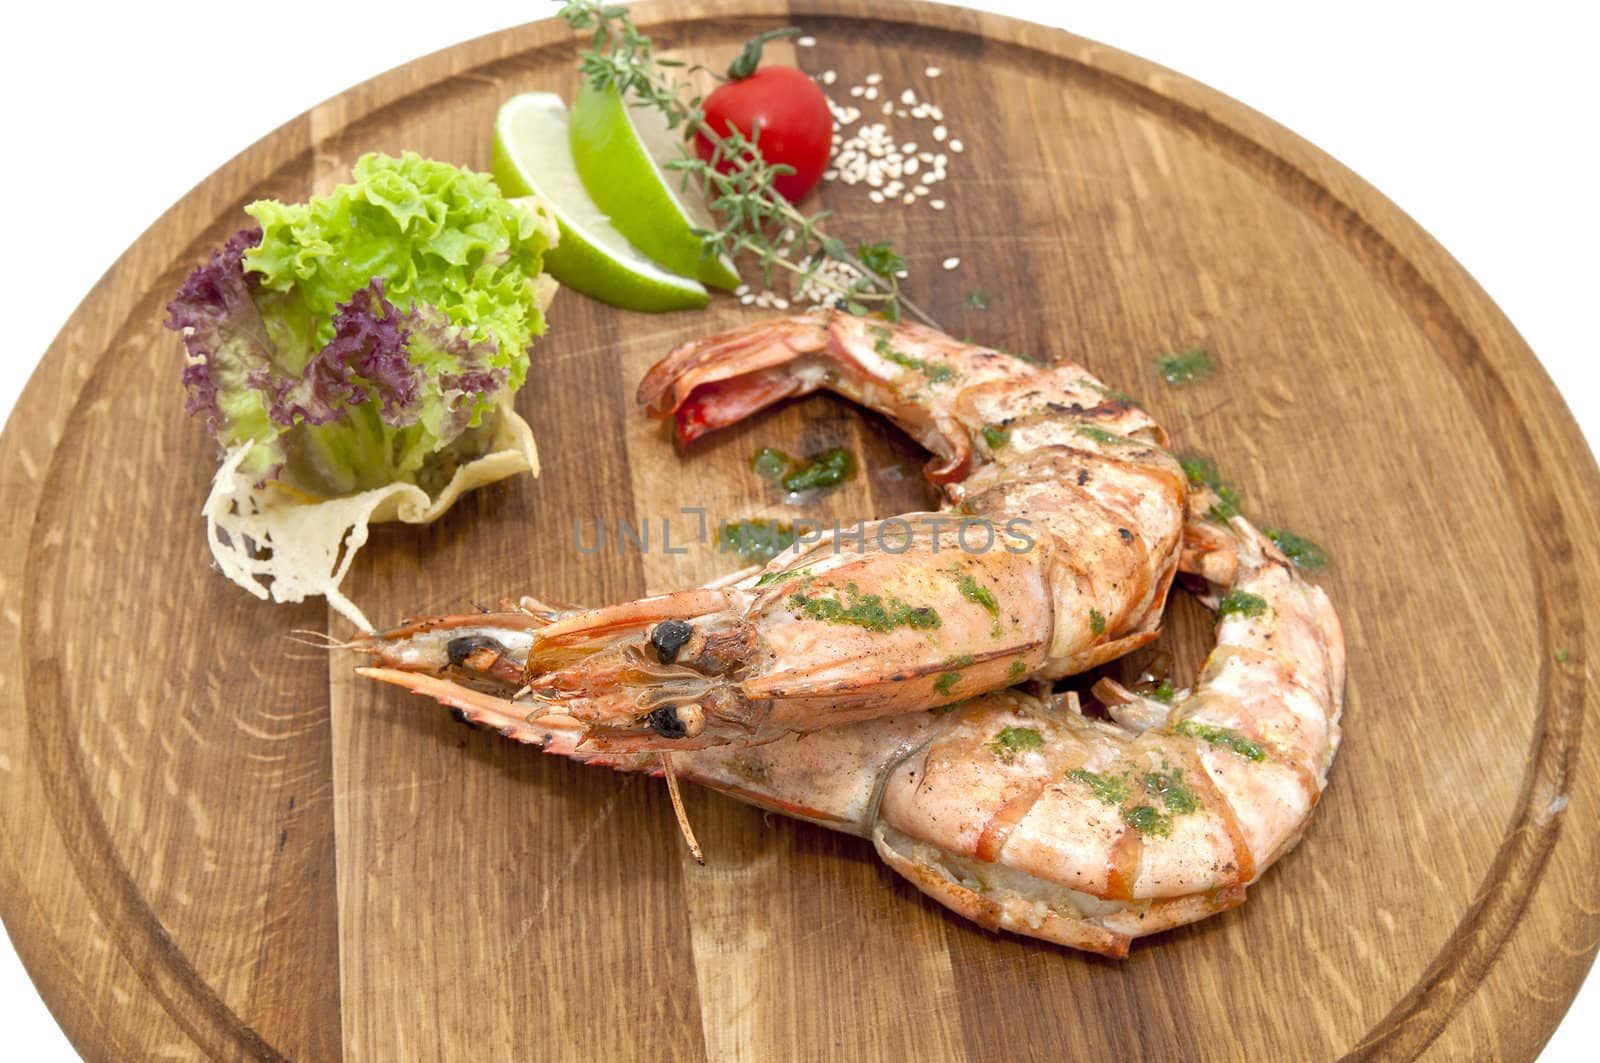 Grilled Shrimp with Orange on a wooden plate